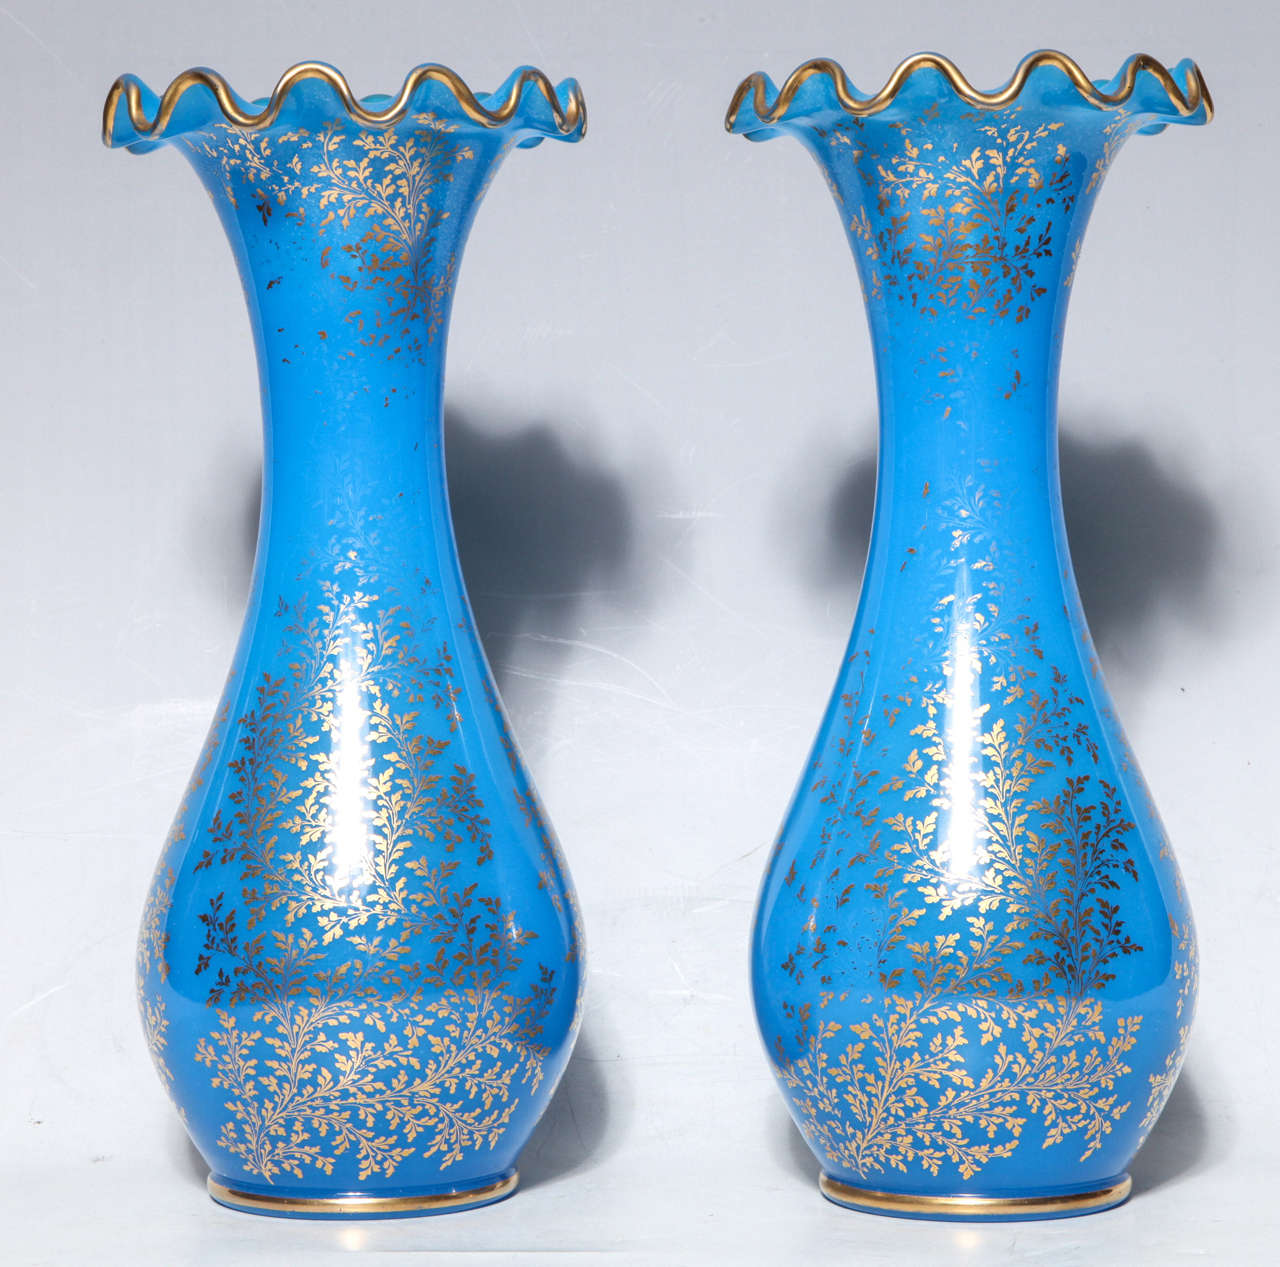 Pair of Baccarat Blue Opaline Crystal Vases with 24-Karat Gold ...